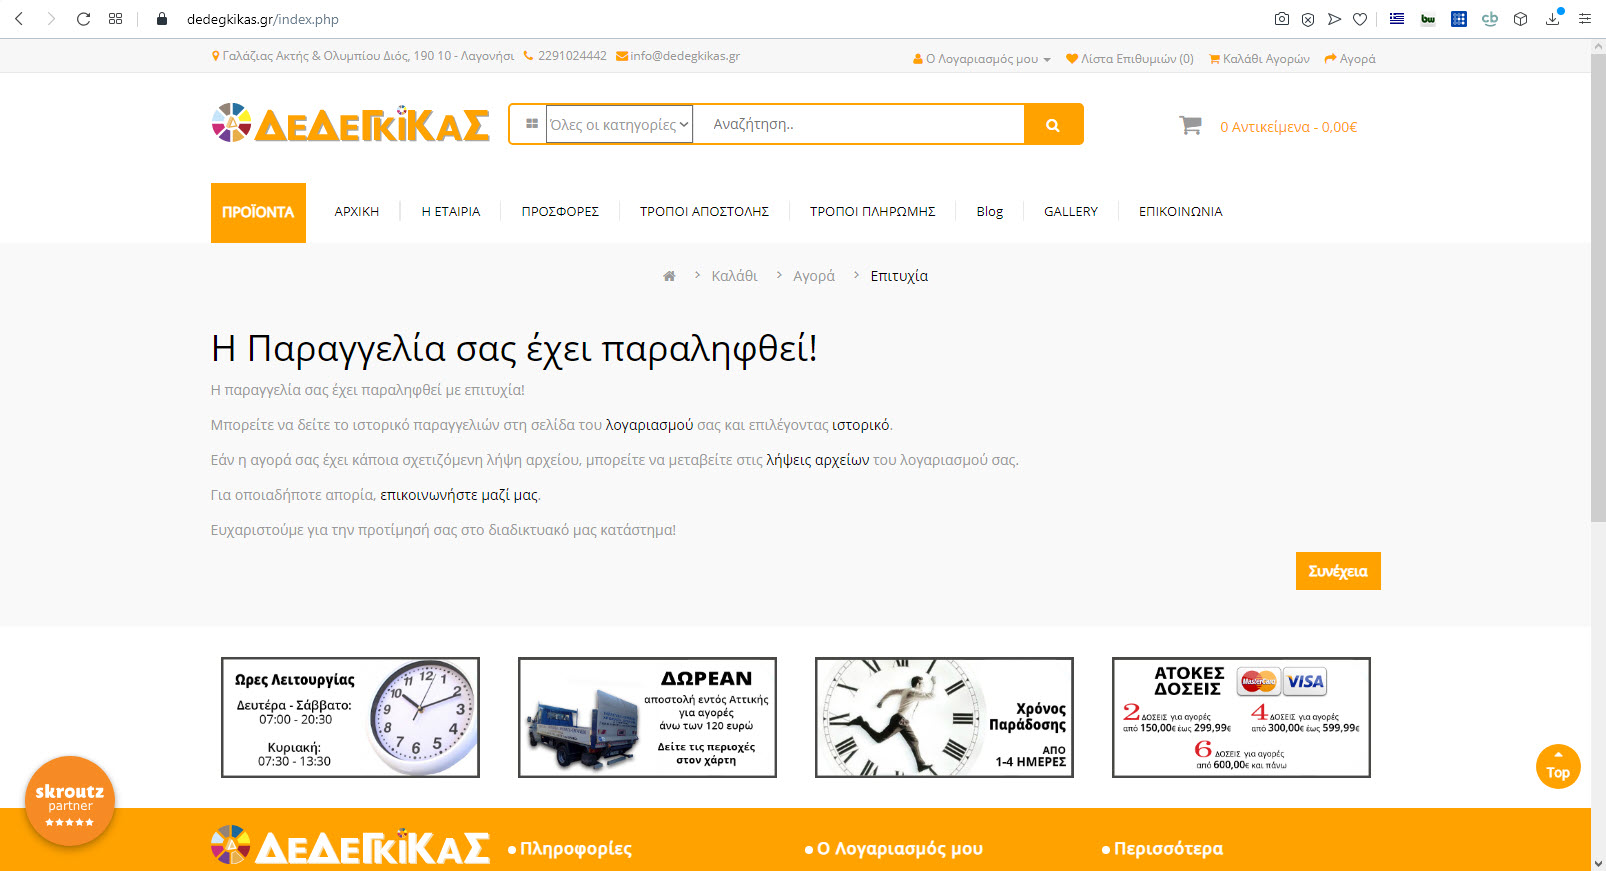 dedegkikas.gr order complete and paid